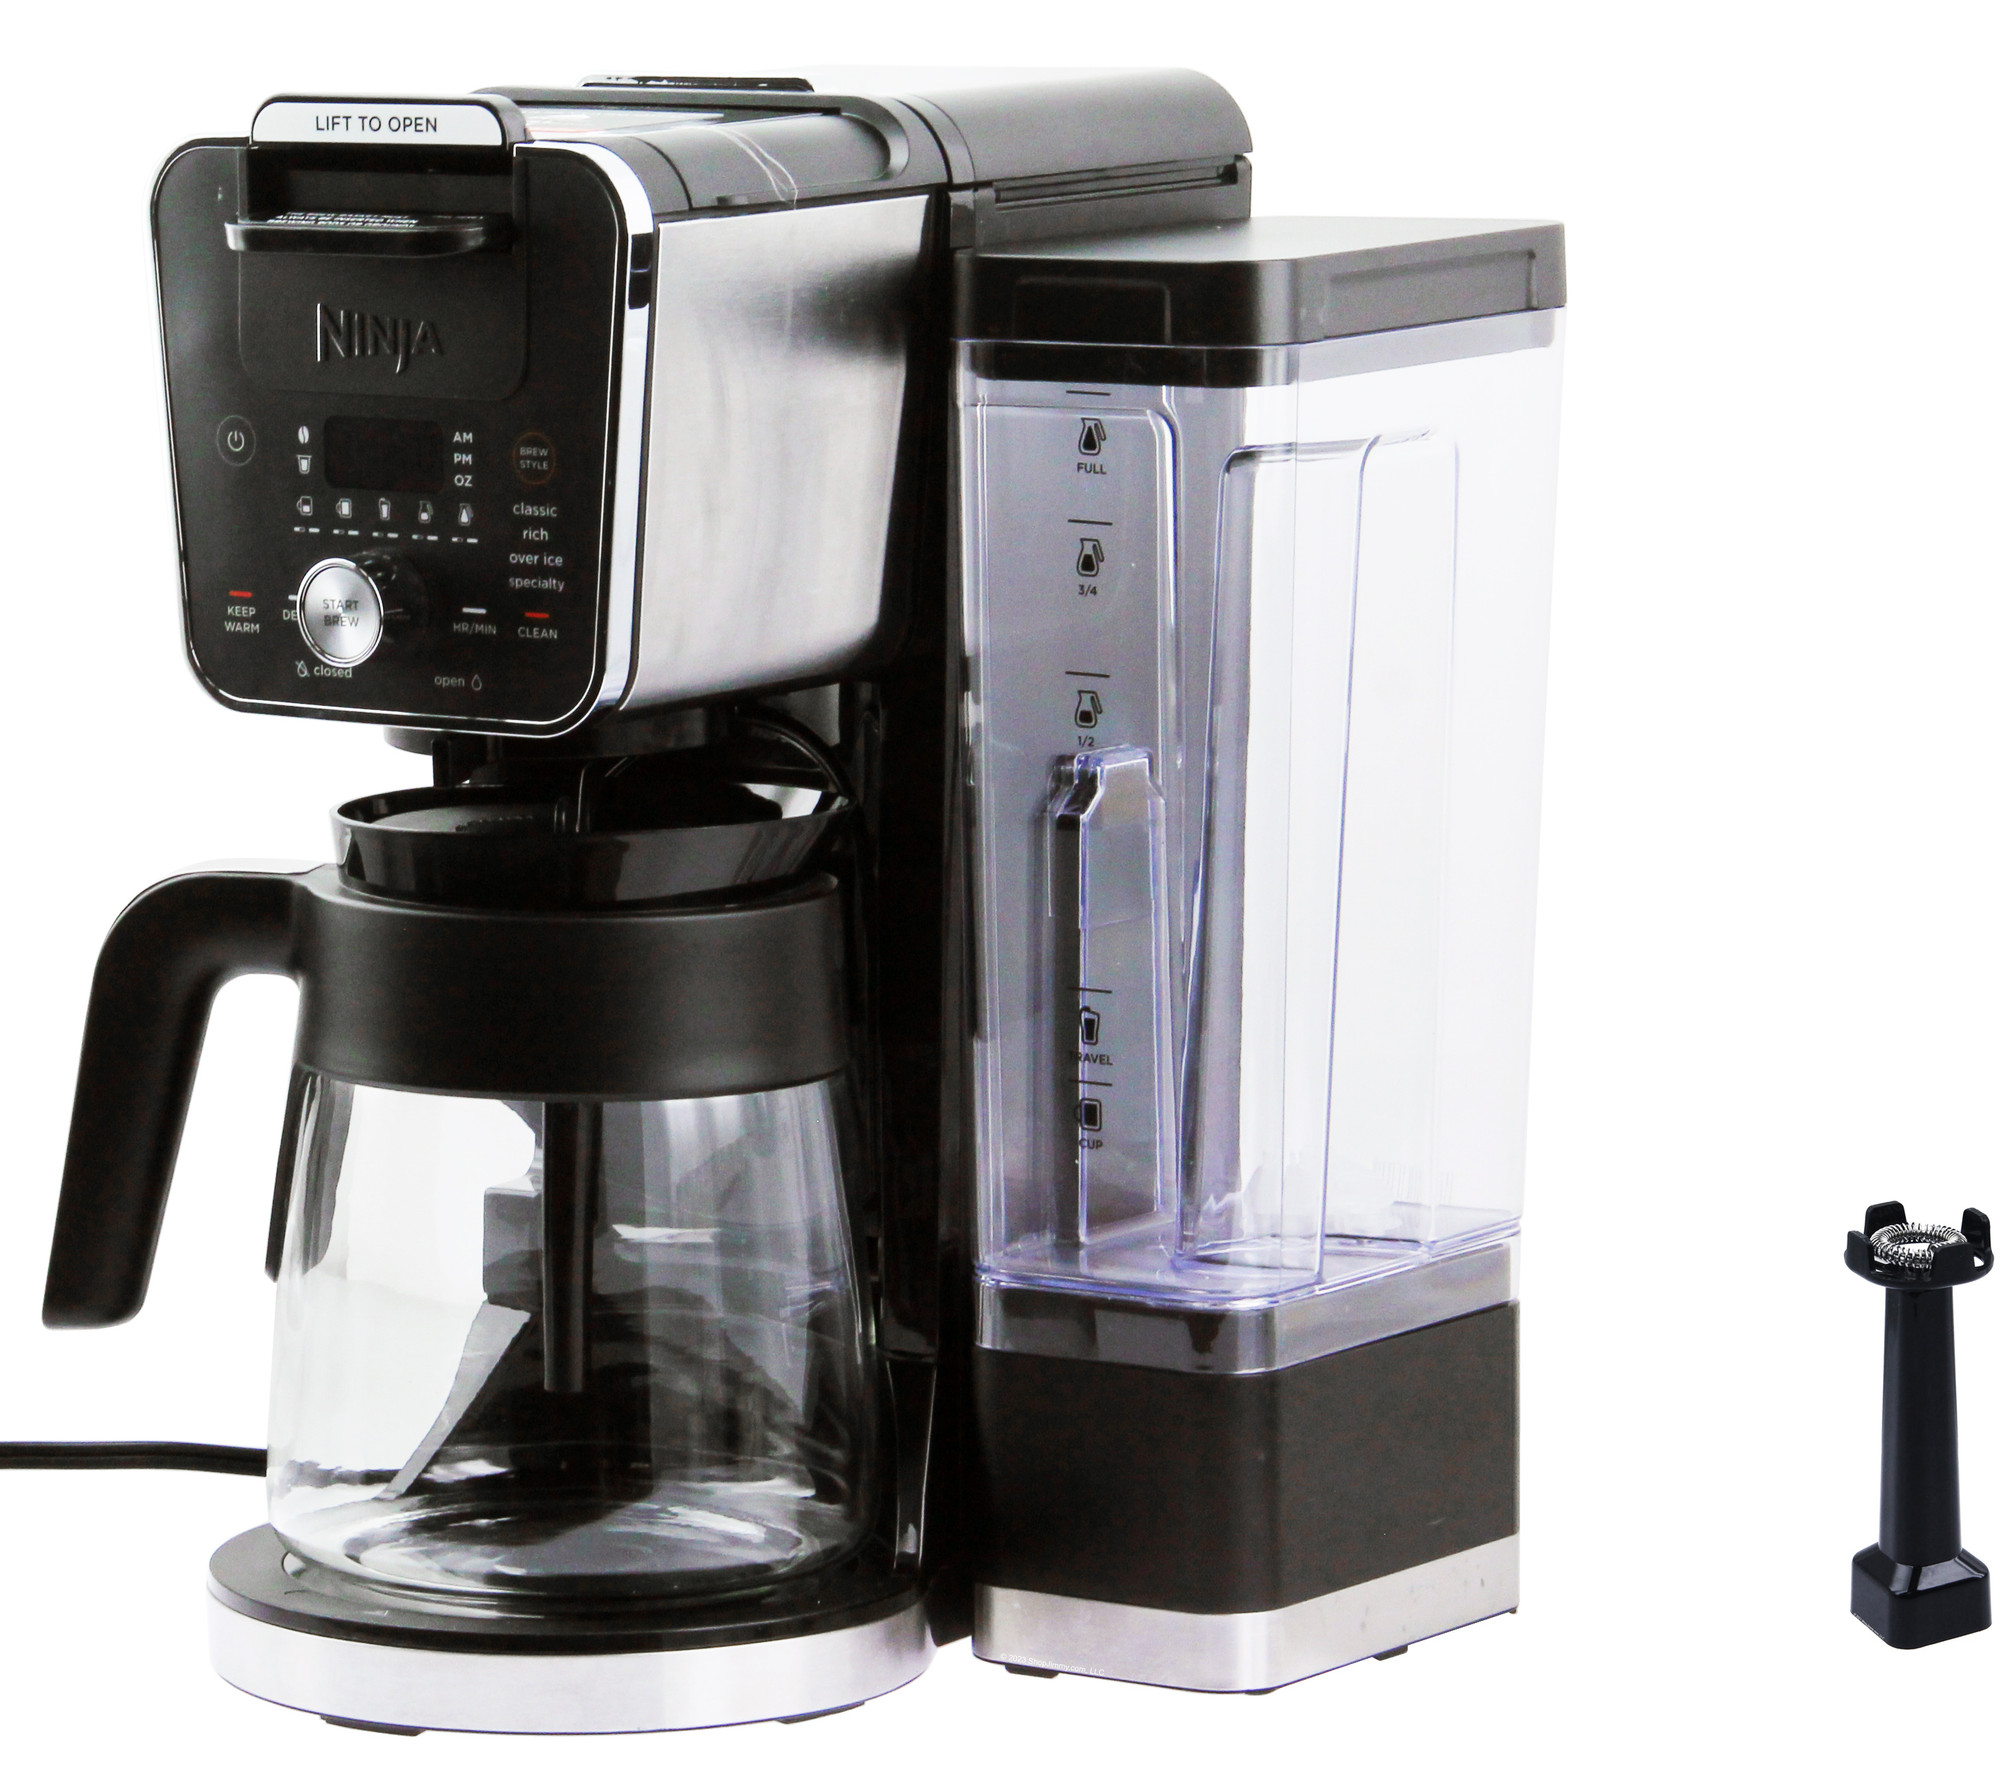 Ninja Replacement Main Unit CFP201 DualBrew Coffee Maker K-Cup 2-Cup Drip  Coffee